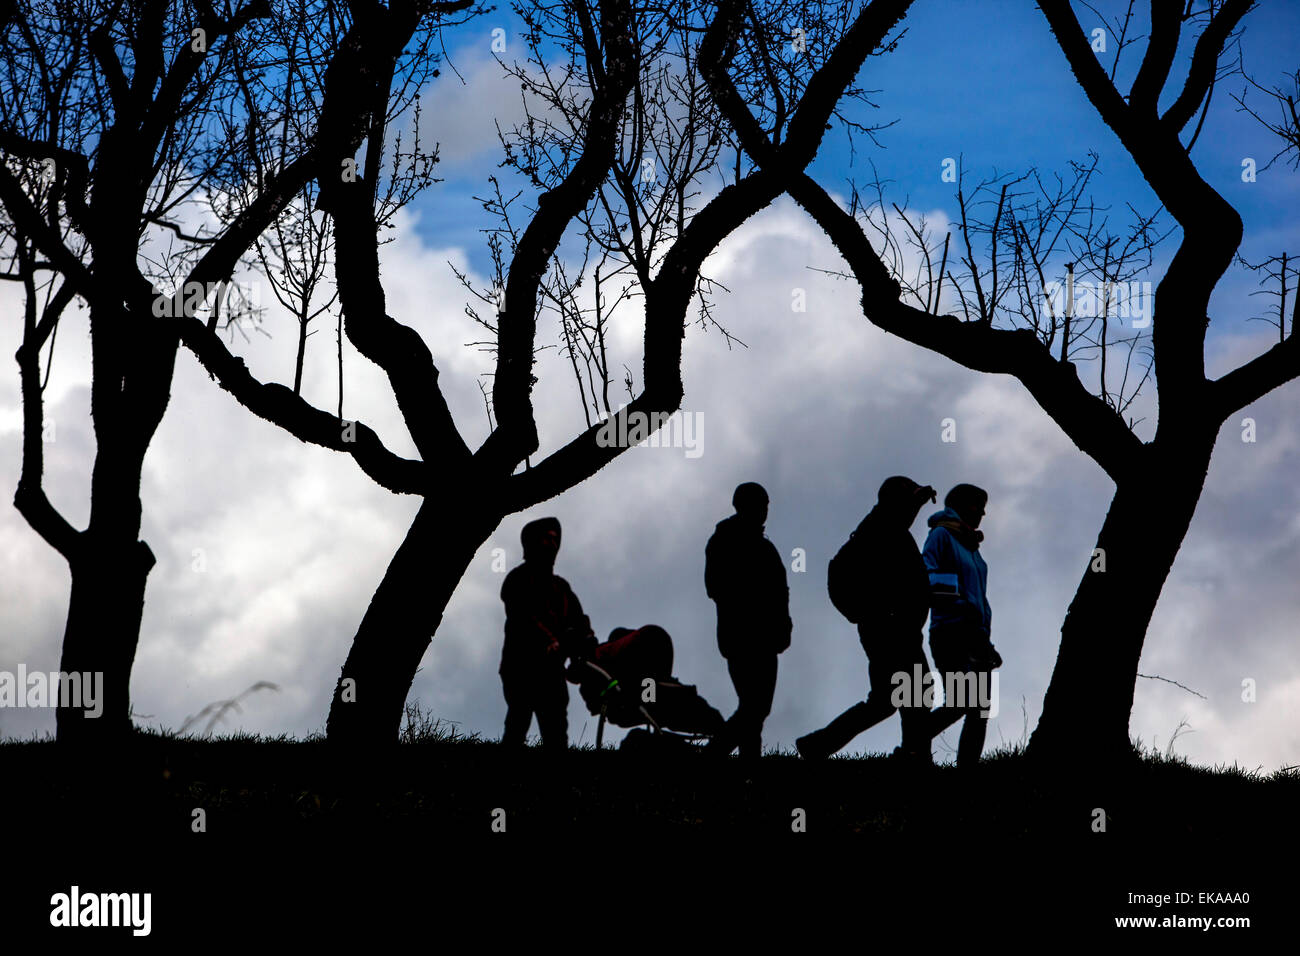 silhouettes of people in the orchard trees without leaves Stock Photo